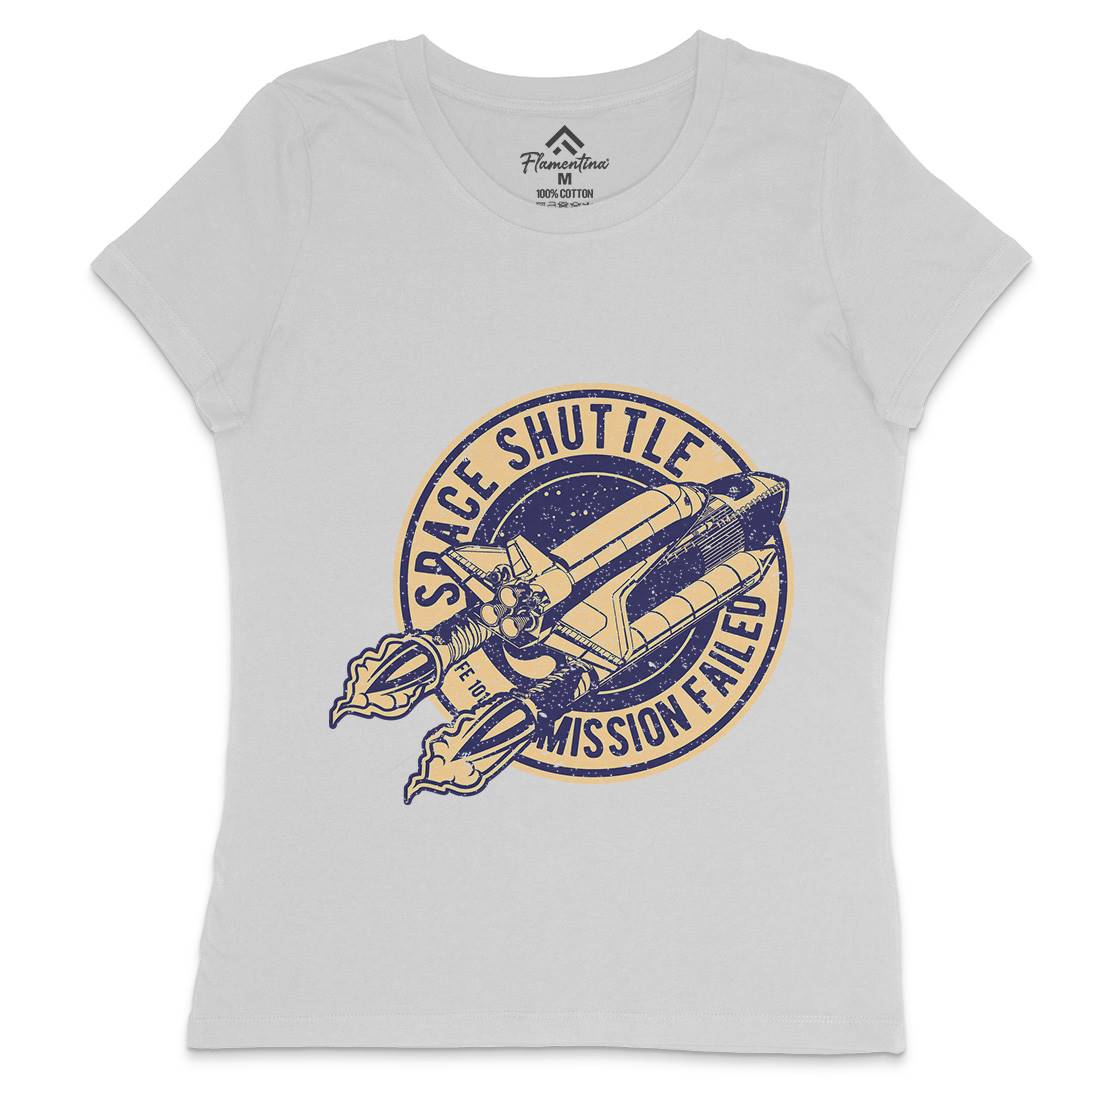 Mission Failed Womens Crew Neck T-Shirt Space A713